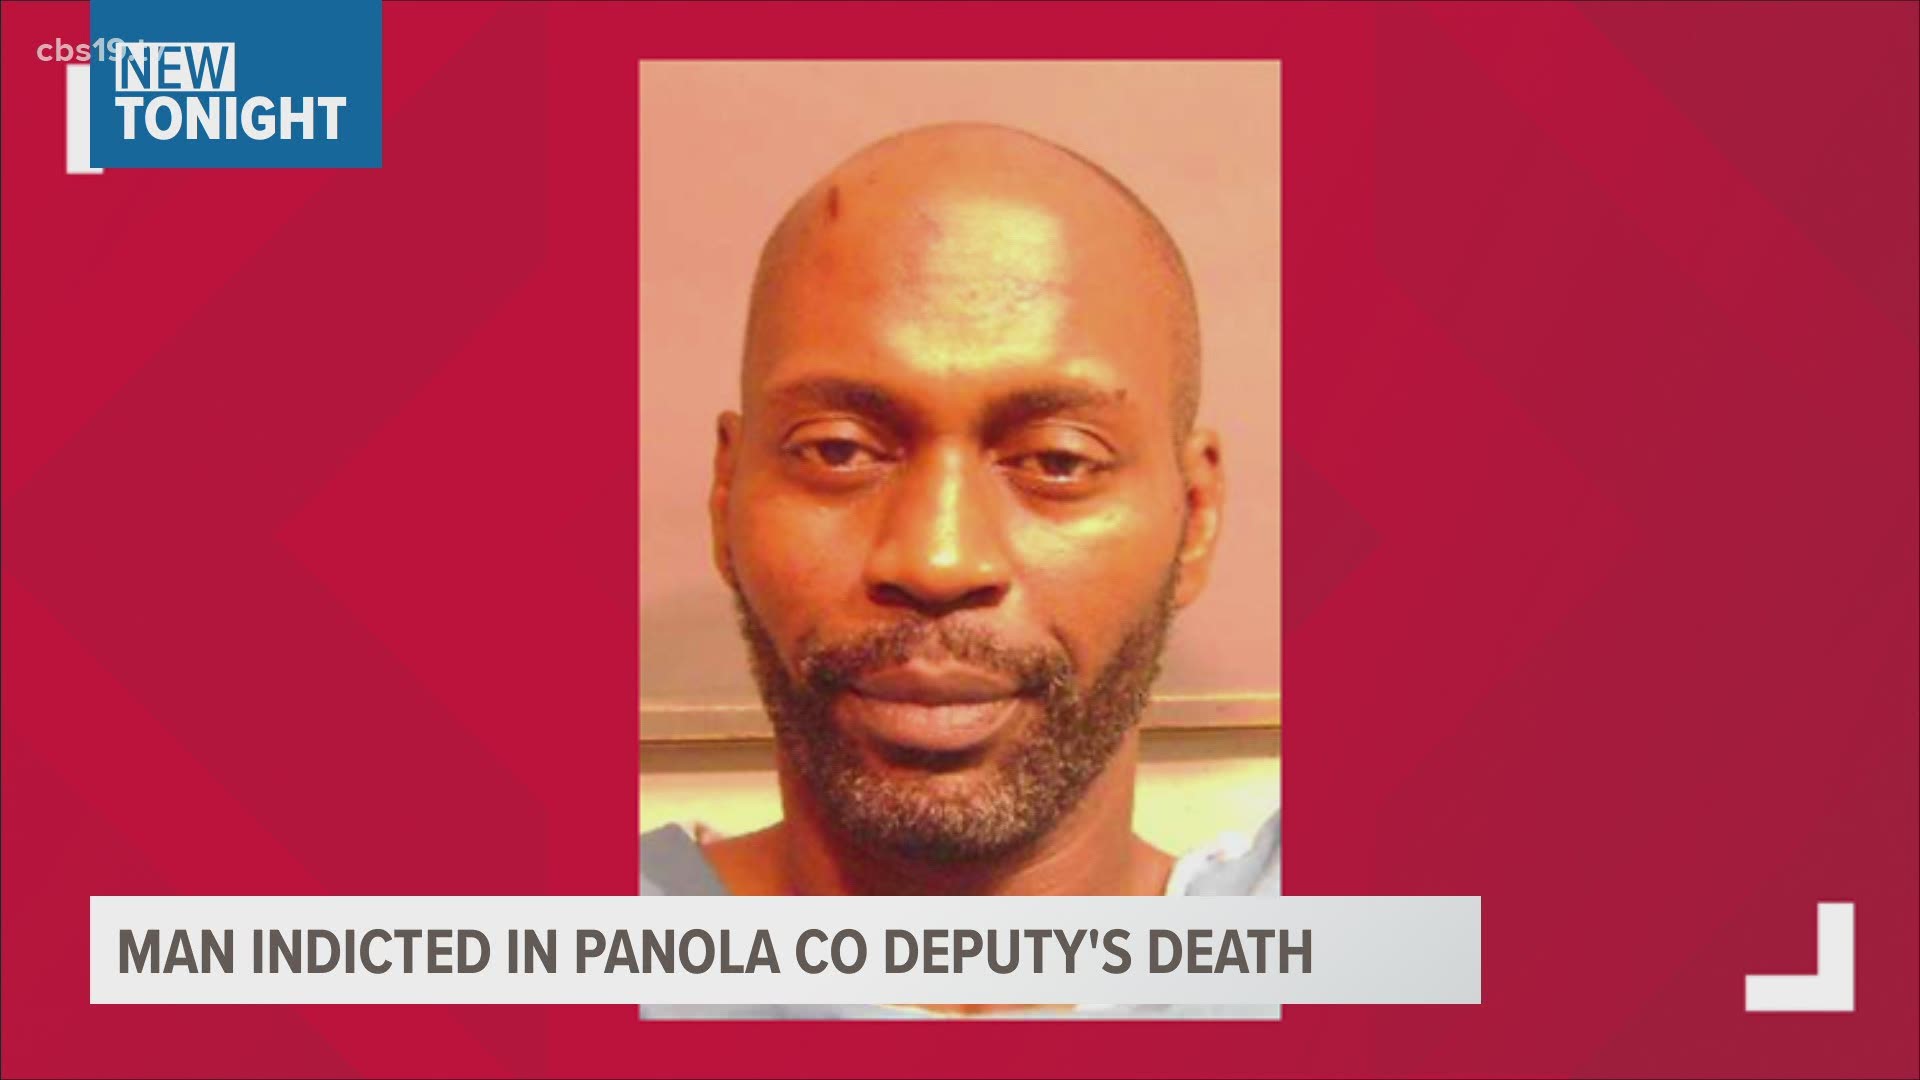 Gregory Newsom is accused of killing Deputy Chris Dickerson in Panola Couny.